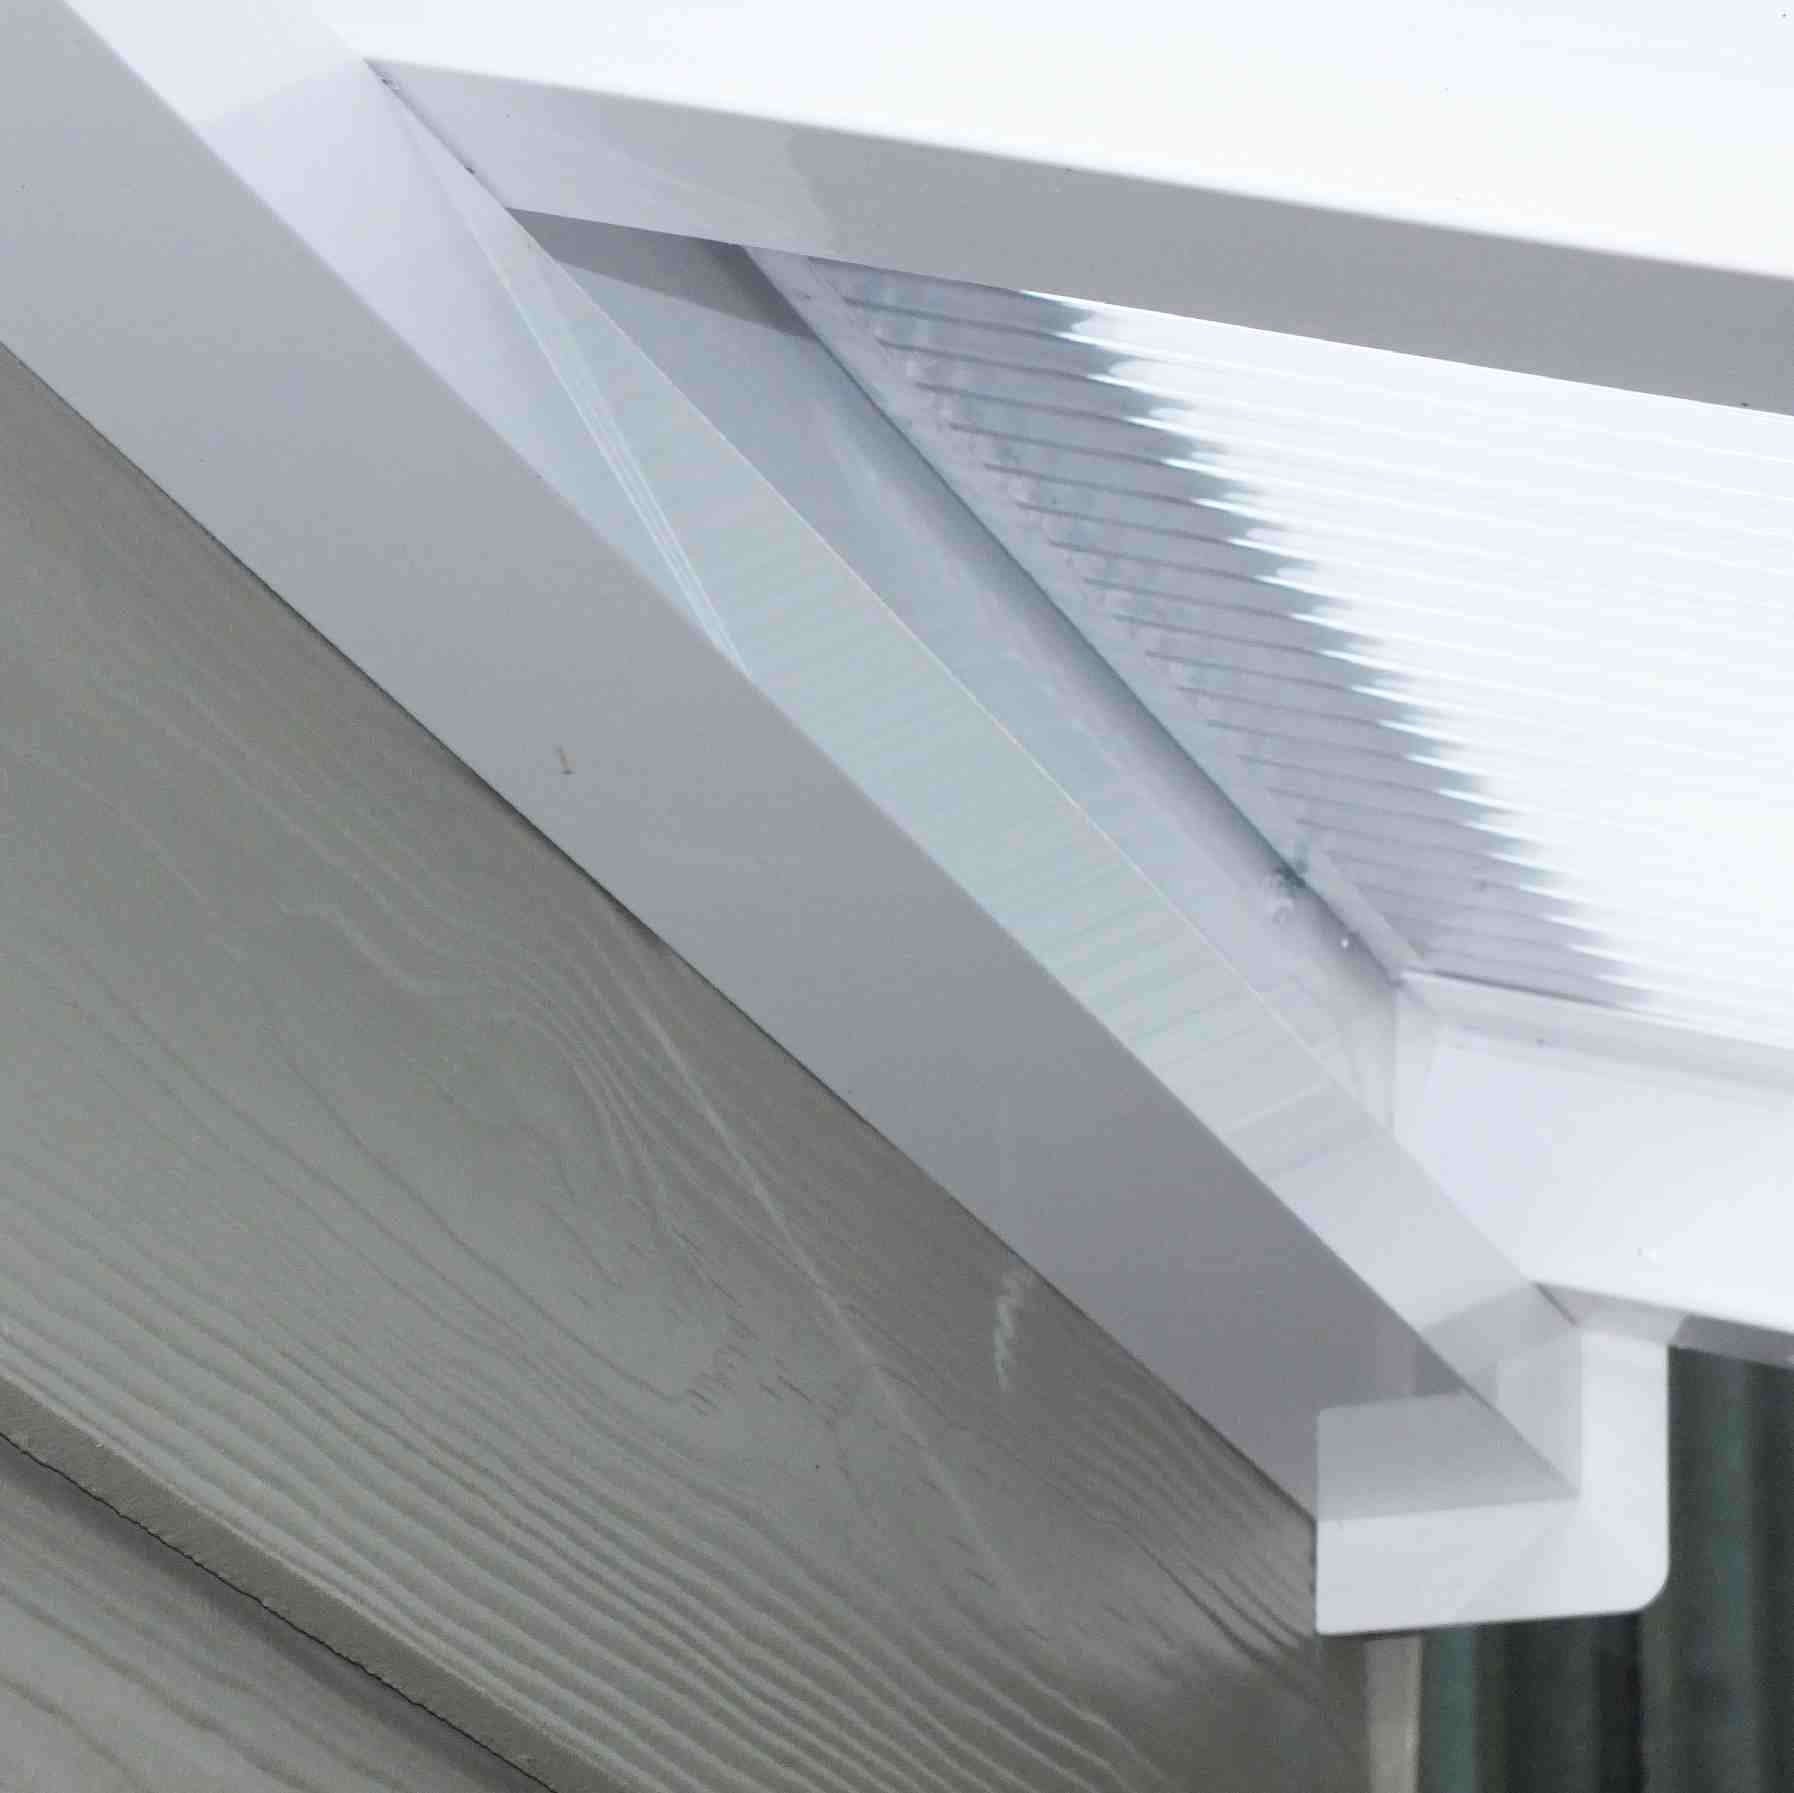 Great deals on Omega Verandah White with 16mm Polycarbonate Glazing - 9.6m (W) x 4.5m (P), (5) Supporting Posts